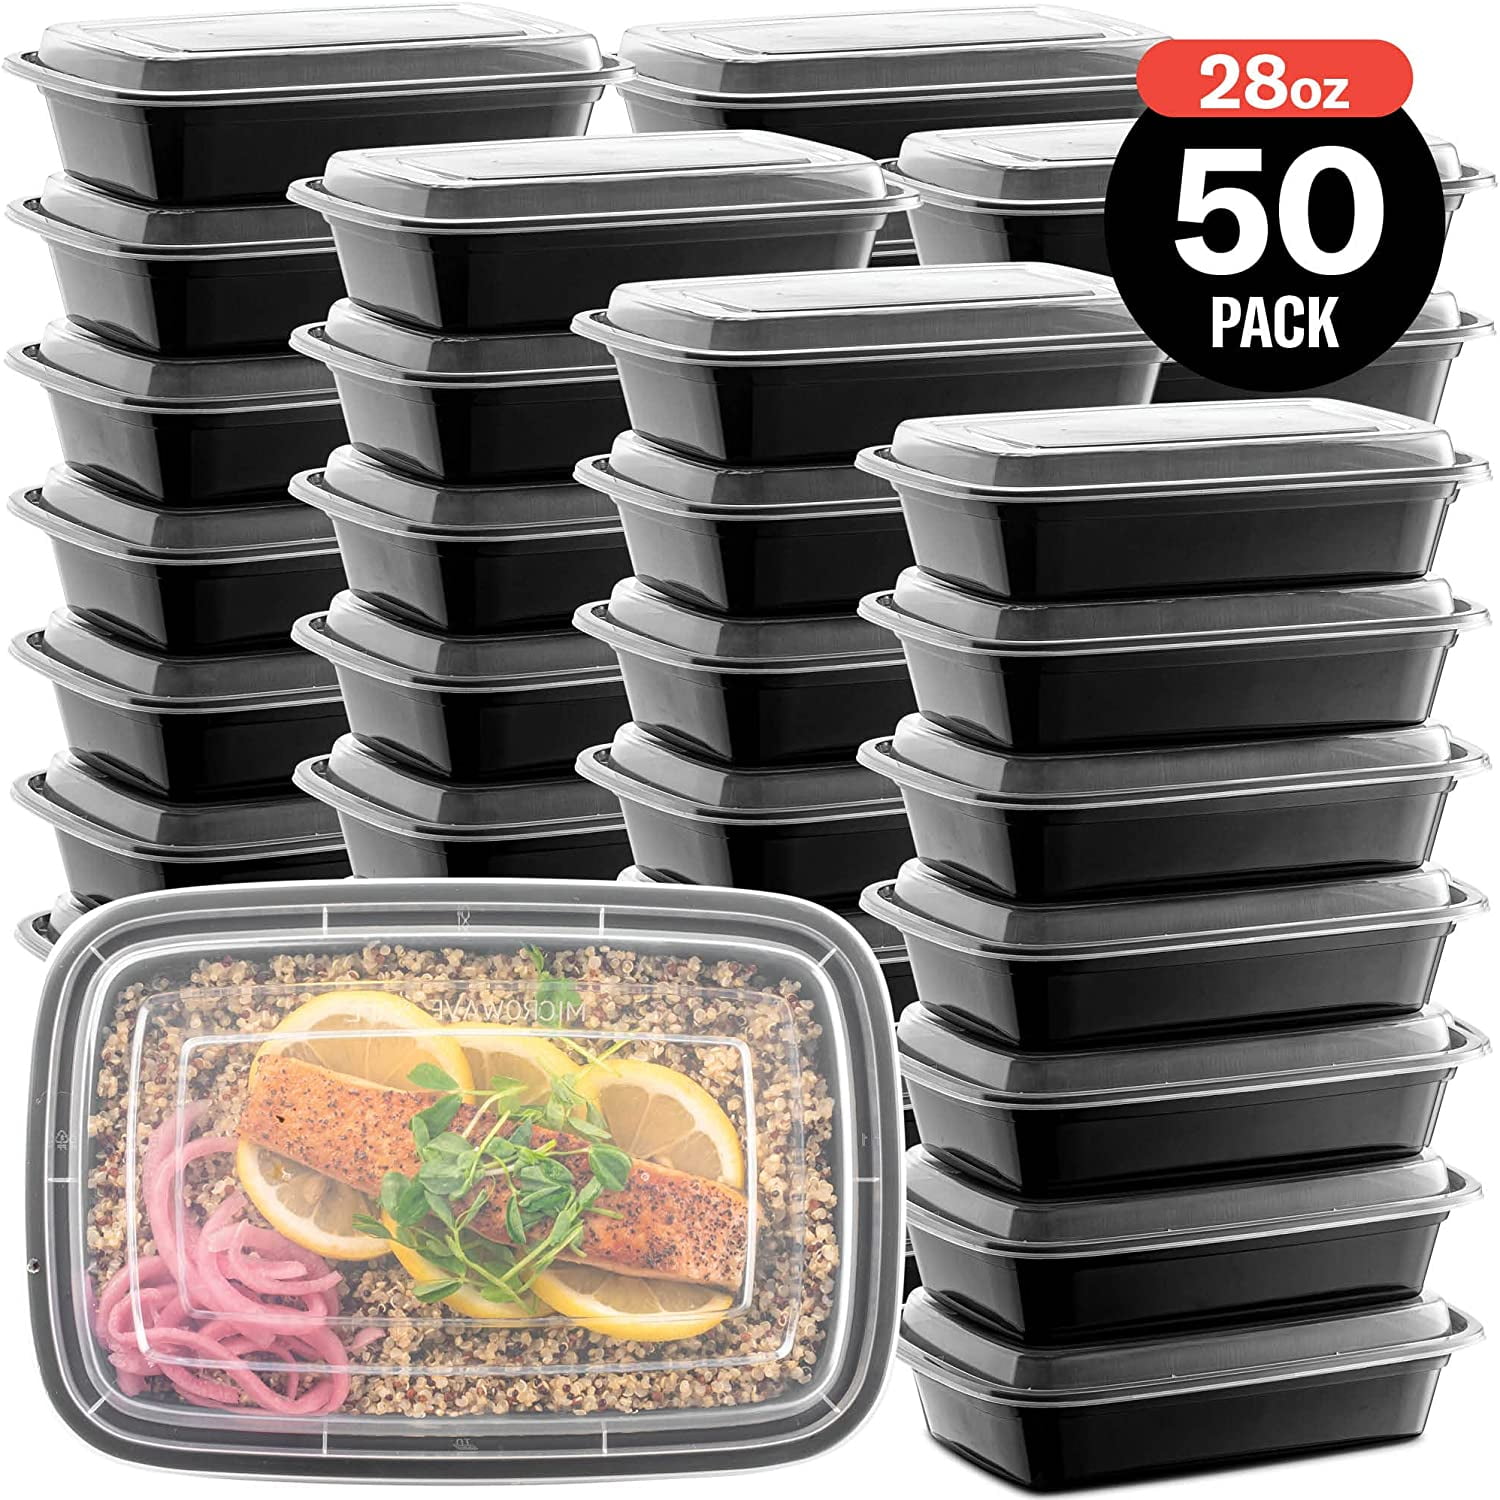 100 Pcs Plastic Meal Prep Containers 26 oz Microwavable Food Storage  Containers Reusable Lunch Bowls with Lids Stackable Disposable Lunch Boxes  1